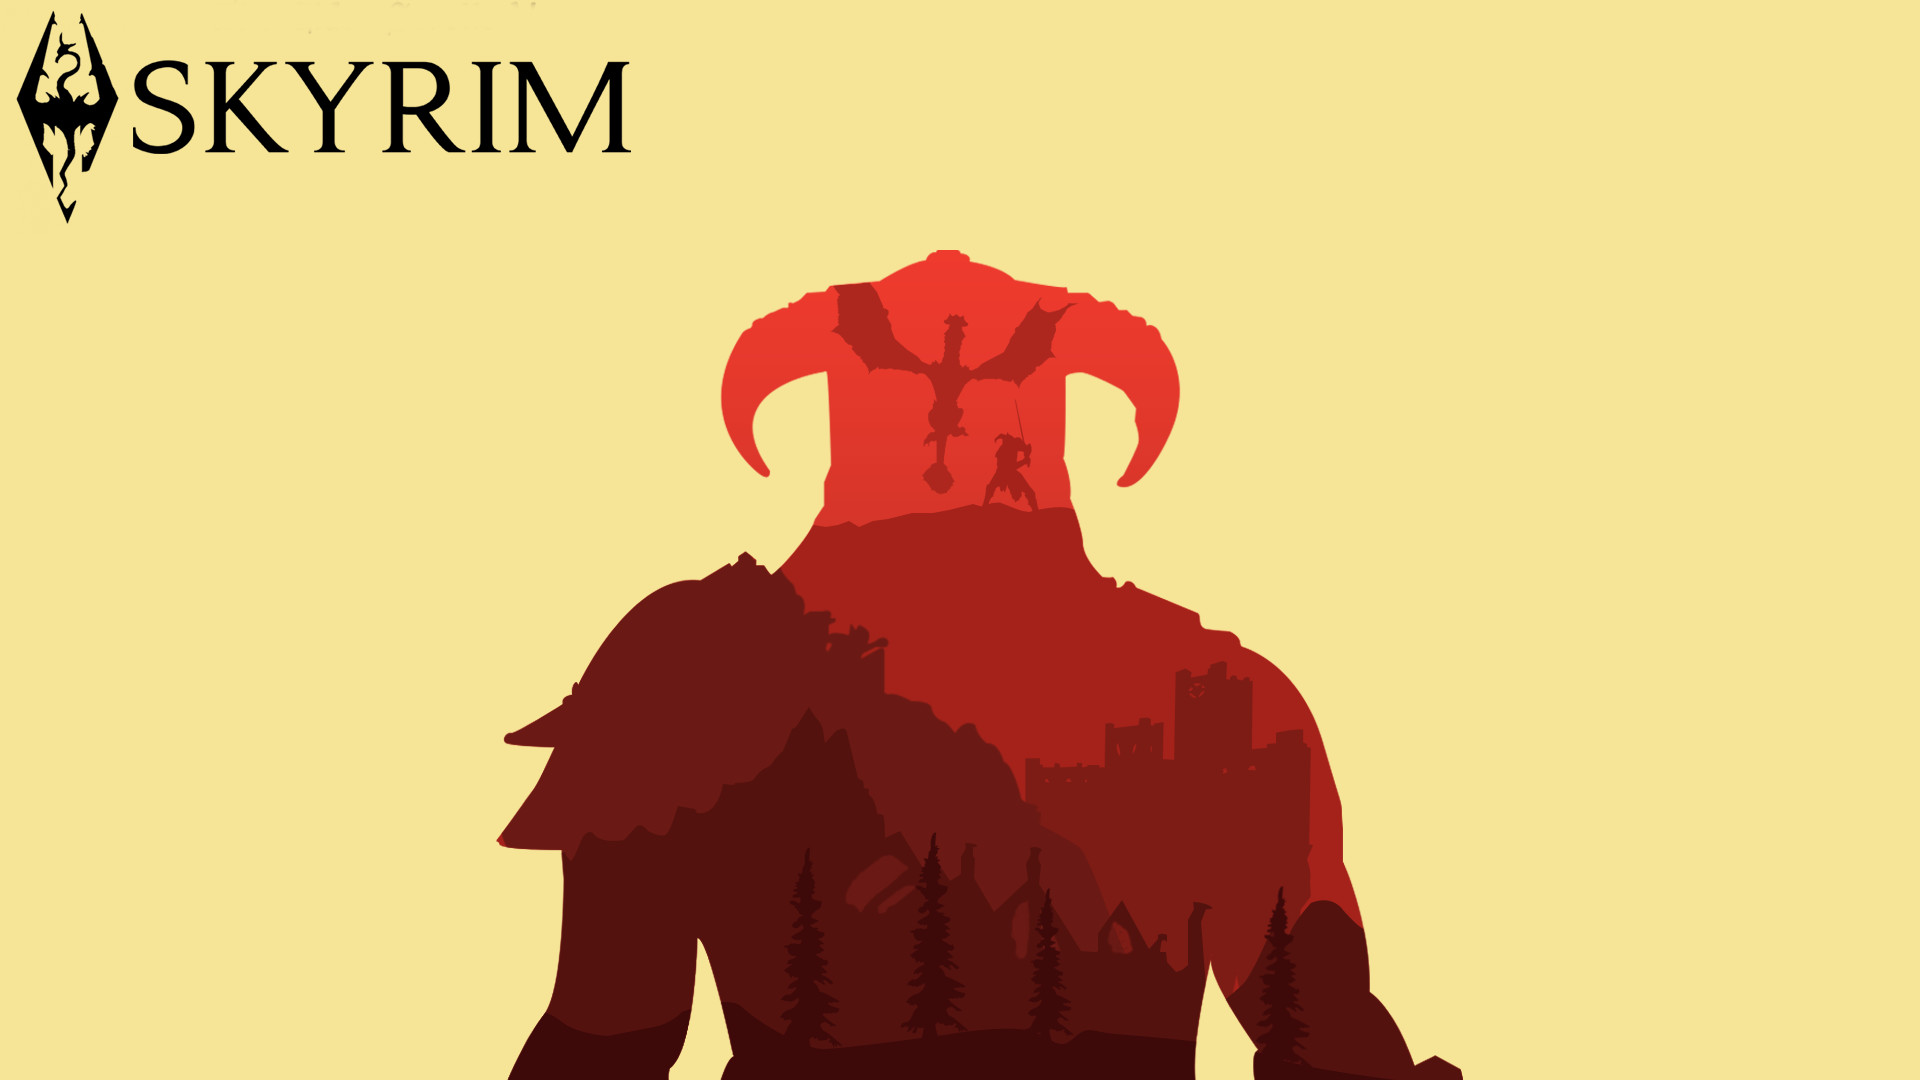 1920x1080 Just finished off a Skyrim wallpaper- thoughts?